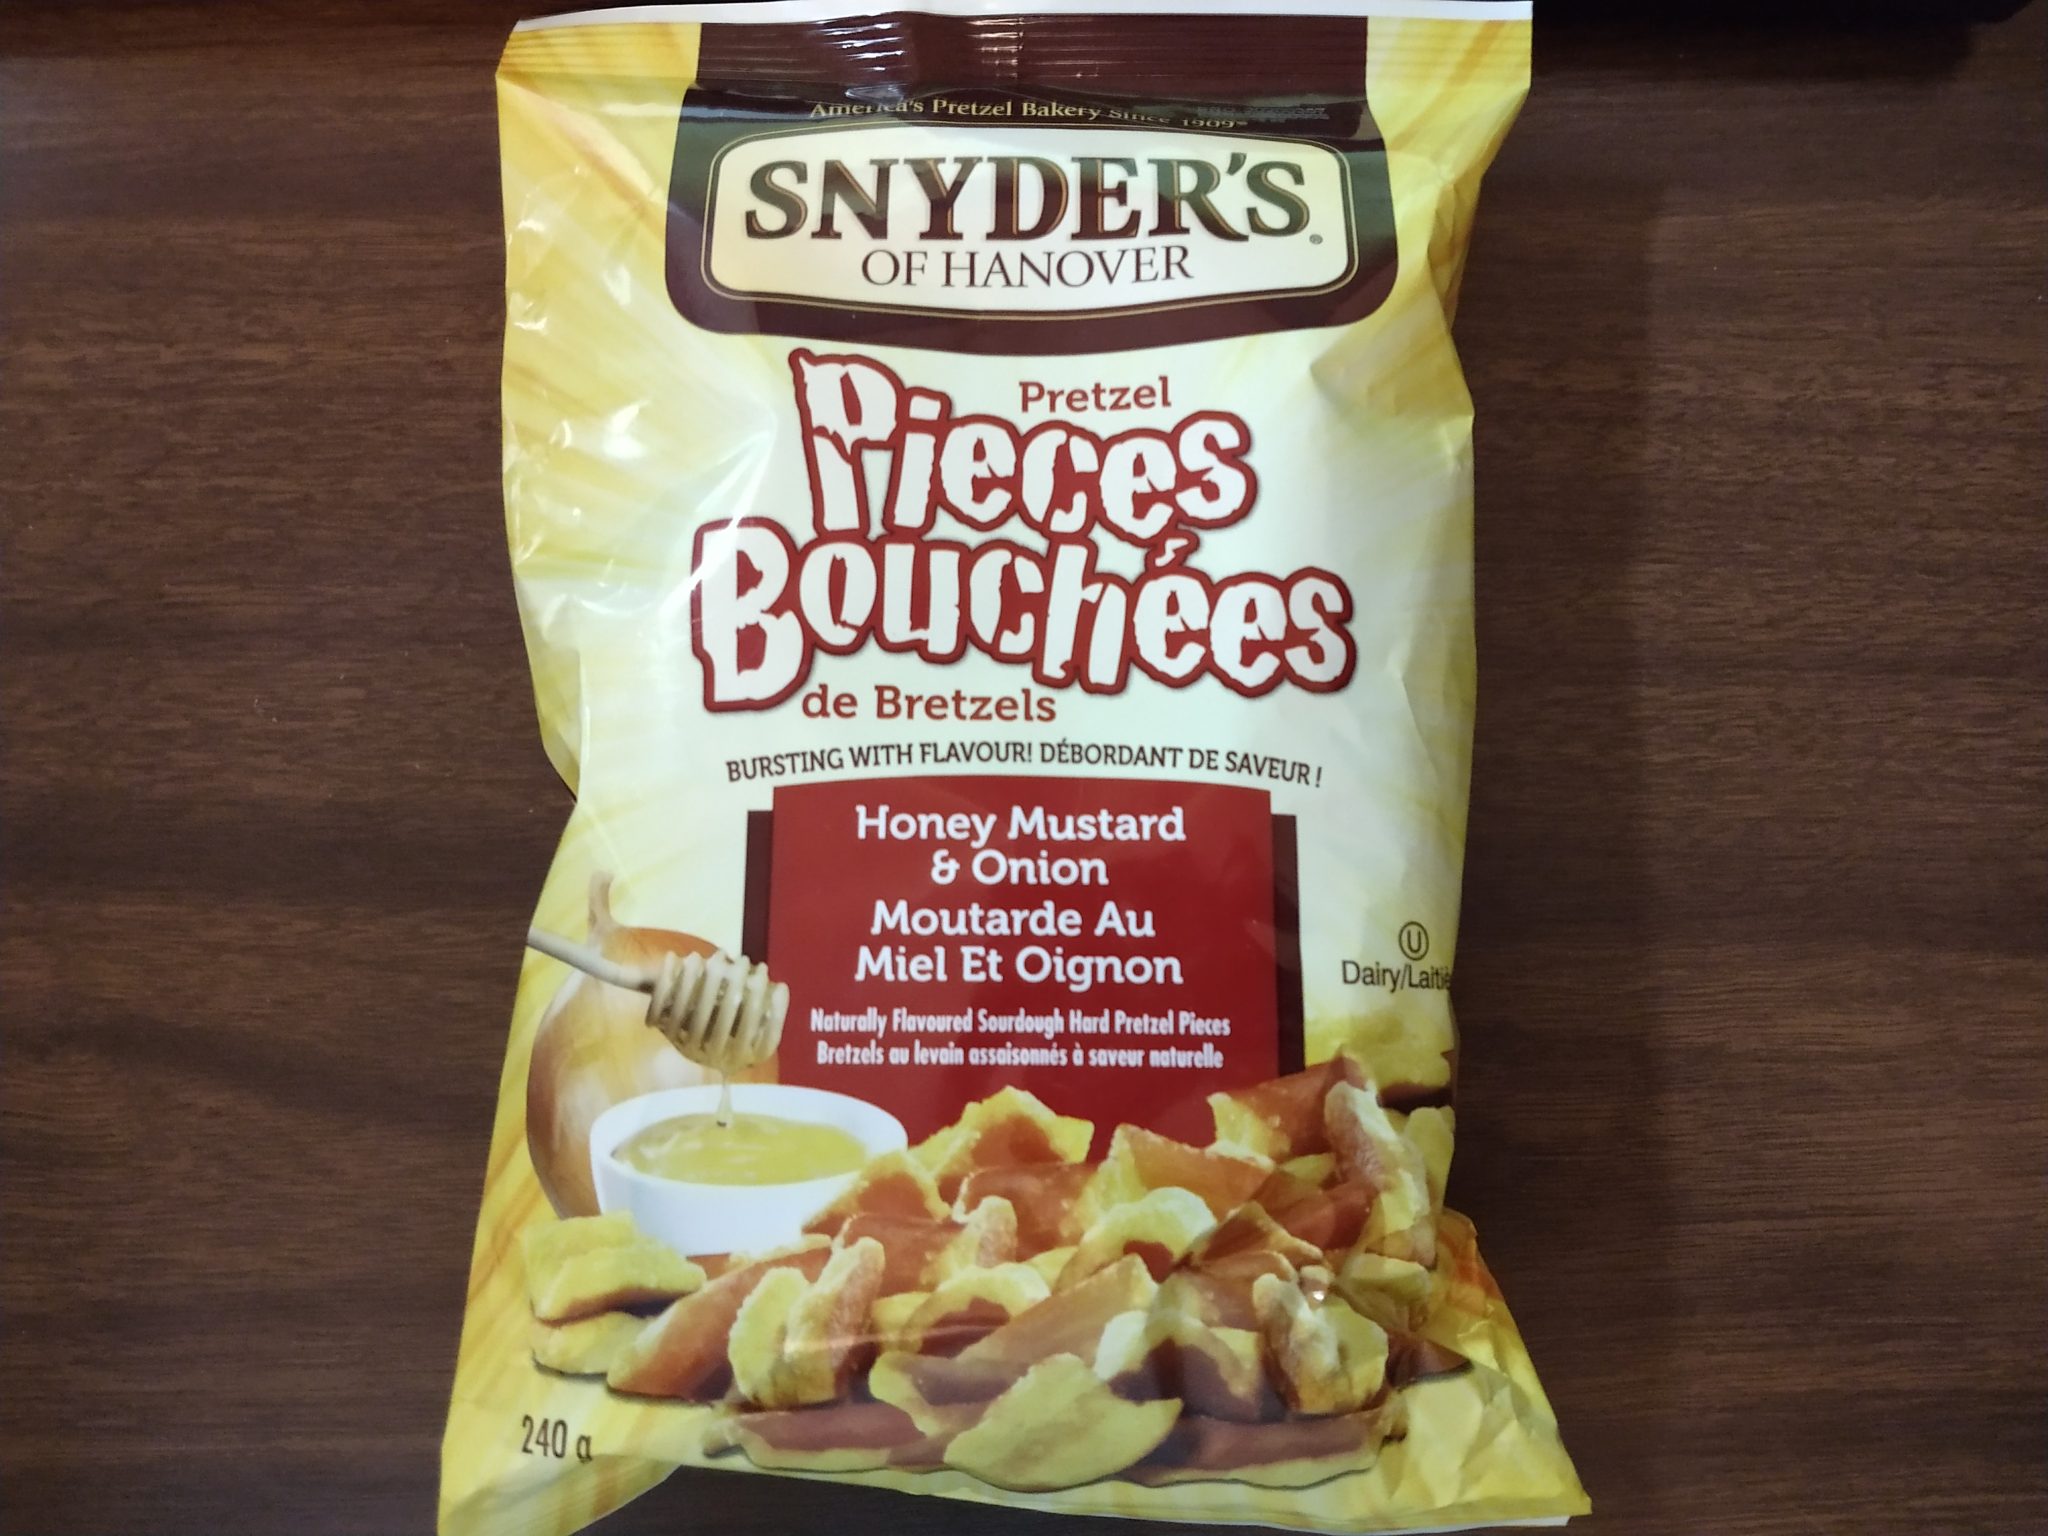 Snyder’s of Hanover Pretzel Pieces – Honey Mustard and Onion